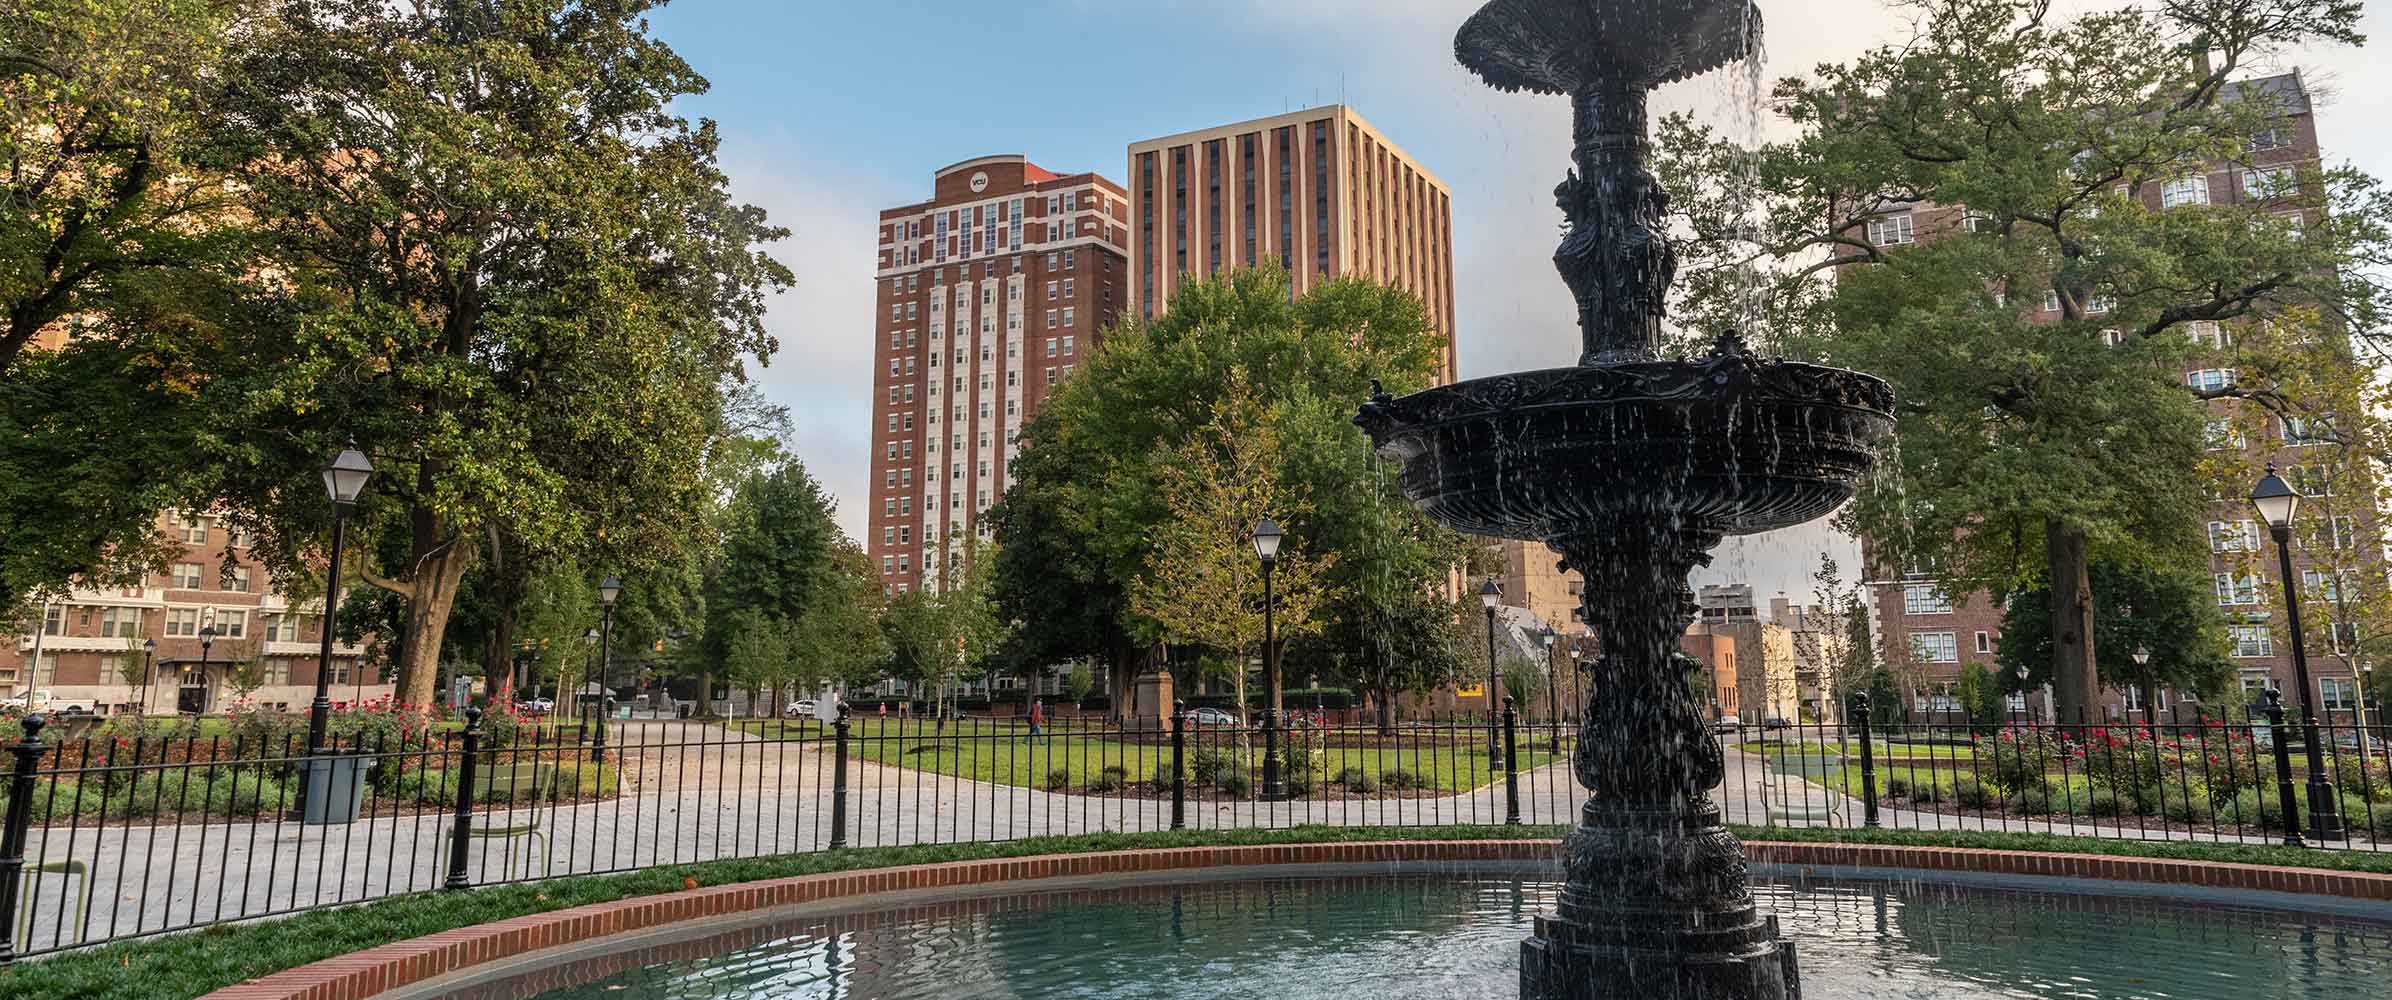 A fountain in Monroe Park with Brandt Hall and Rhoads Hall in the background